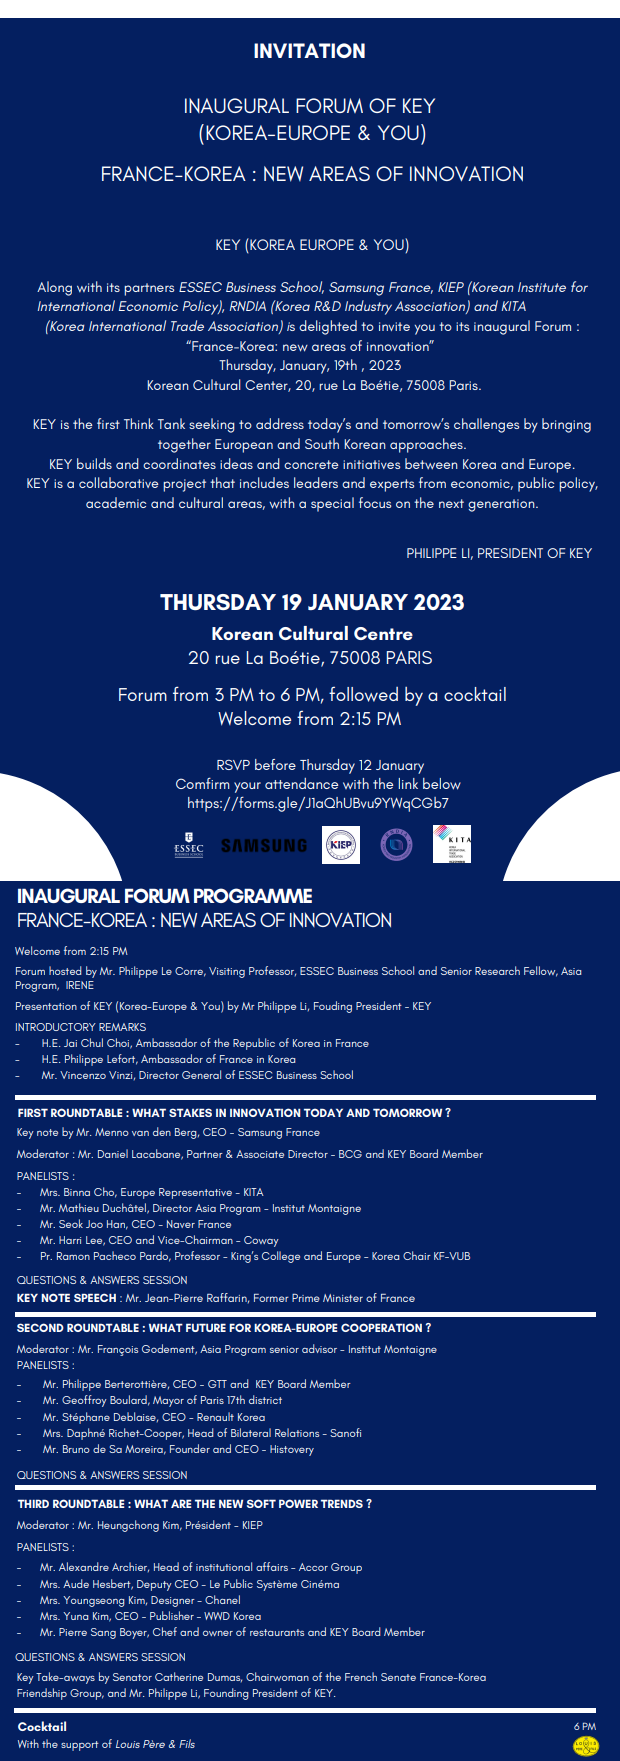 INAUGURAL FORUM OF KEY: France-Korea New Areas of Innovation 이미지